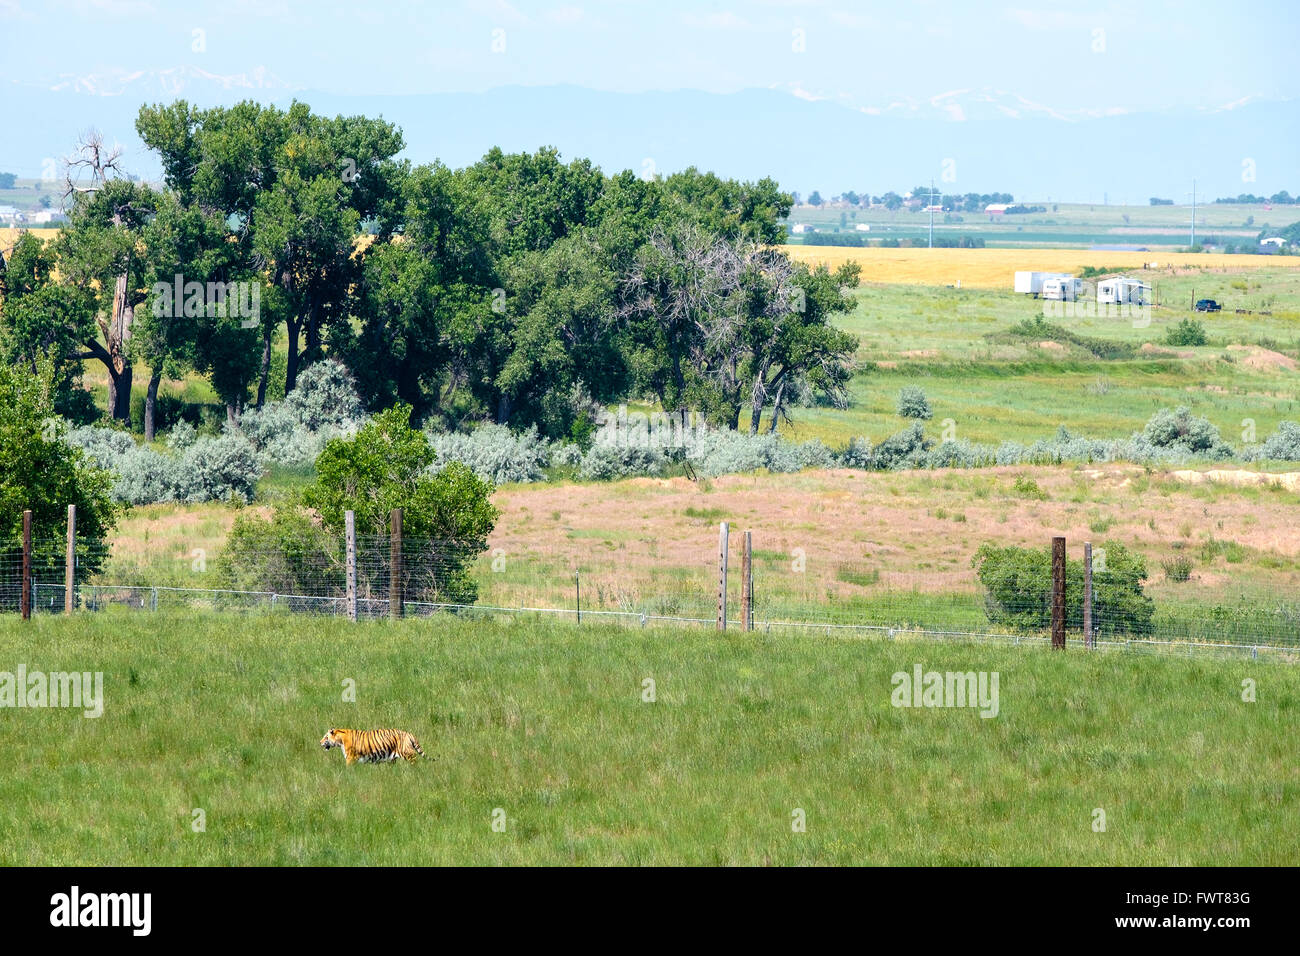 A tiger roams in his enclosure at the Wild Animal Sanctuary in Keenesburg, Colorado. Stock Photo